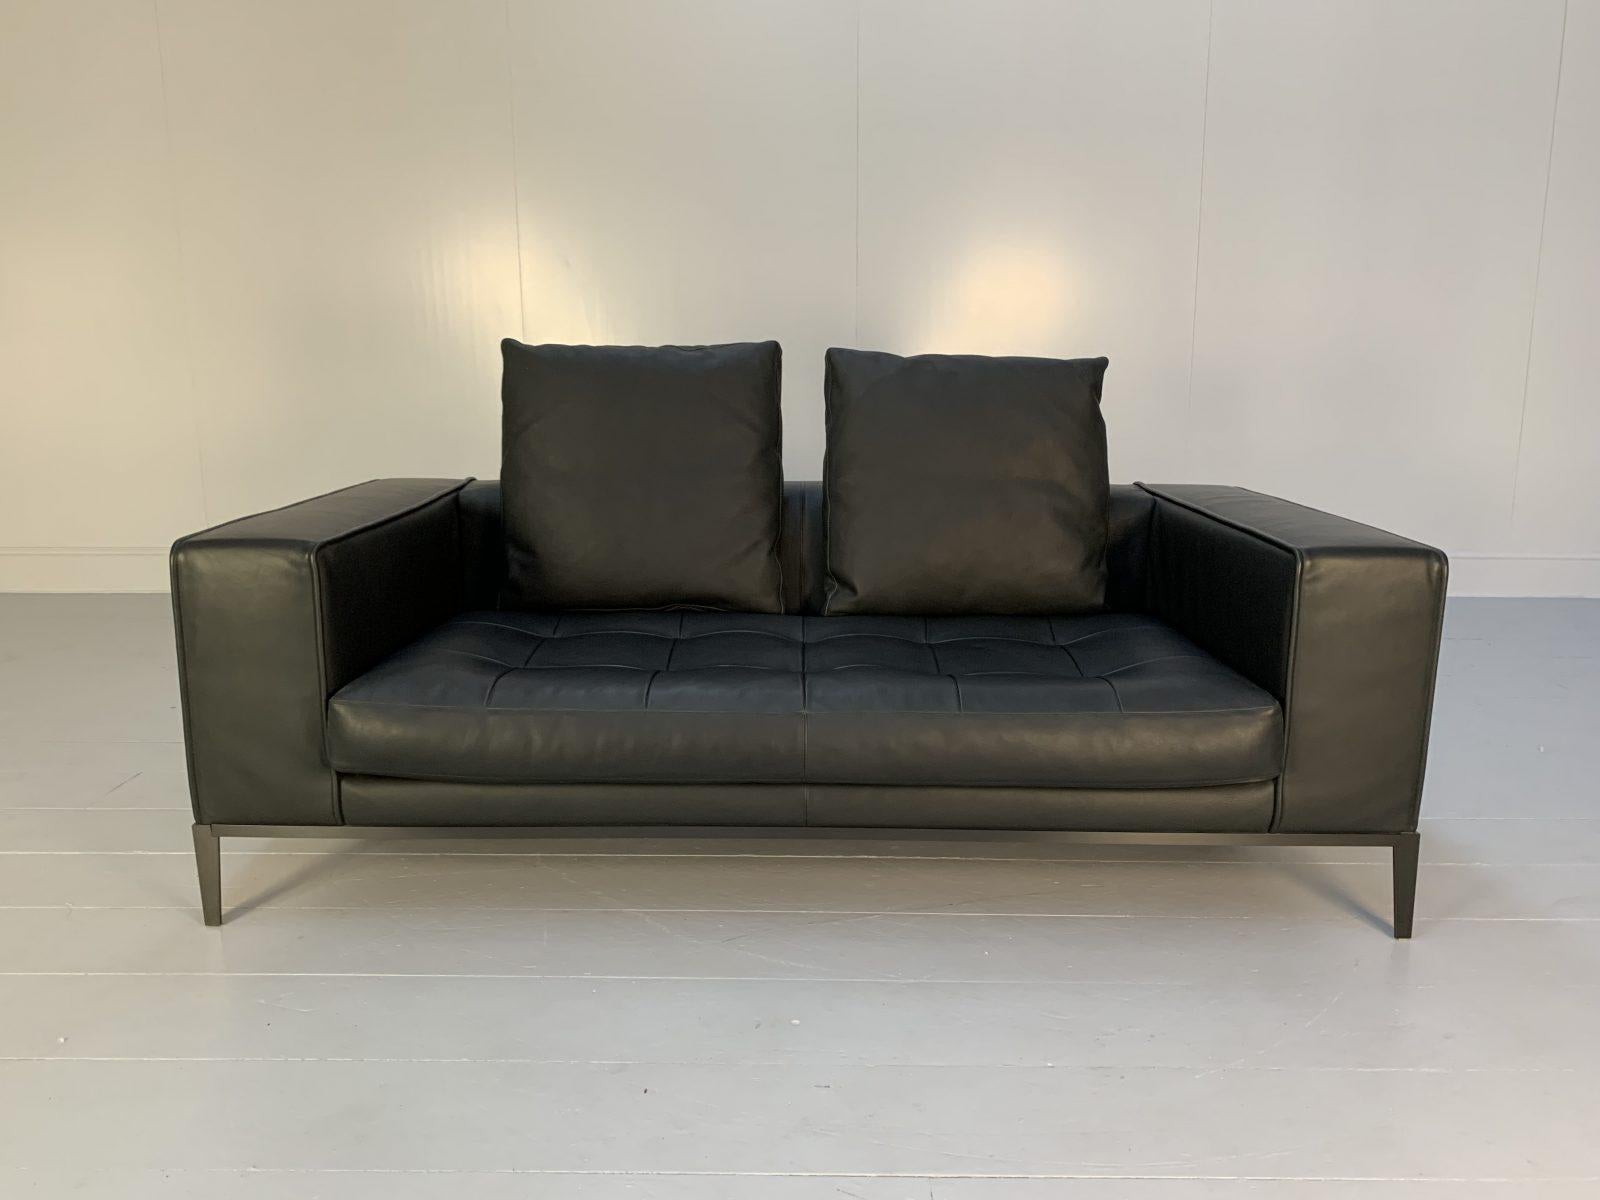 Hello Friends, and welcome to another unmissable offering from Lord Browns Furniture, the UK’s premier resource for fine Sofas and Chairs.

On offer on this occasion is a superb “Simplex 8SMD197_1” Large 2.5-Seat Sofa from the “Maxalto” range of